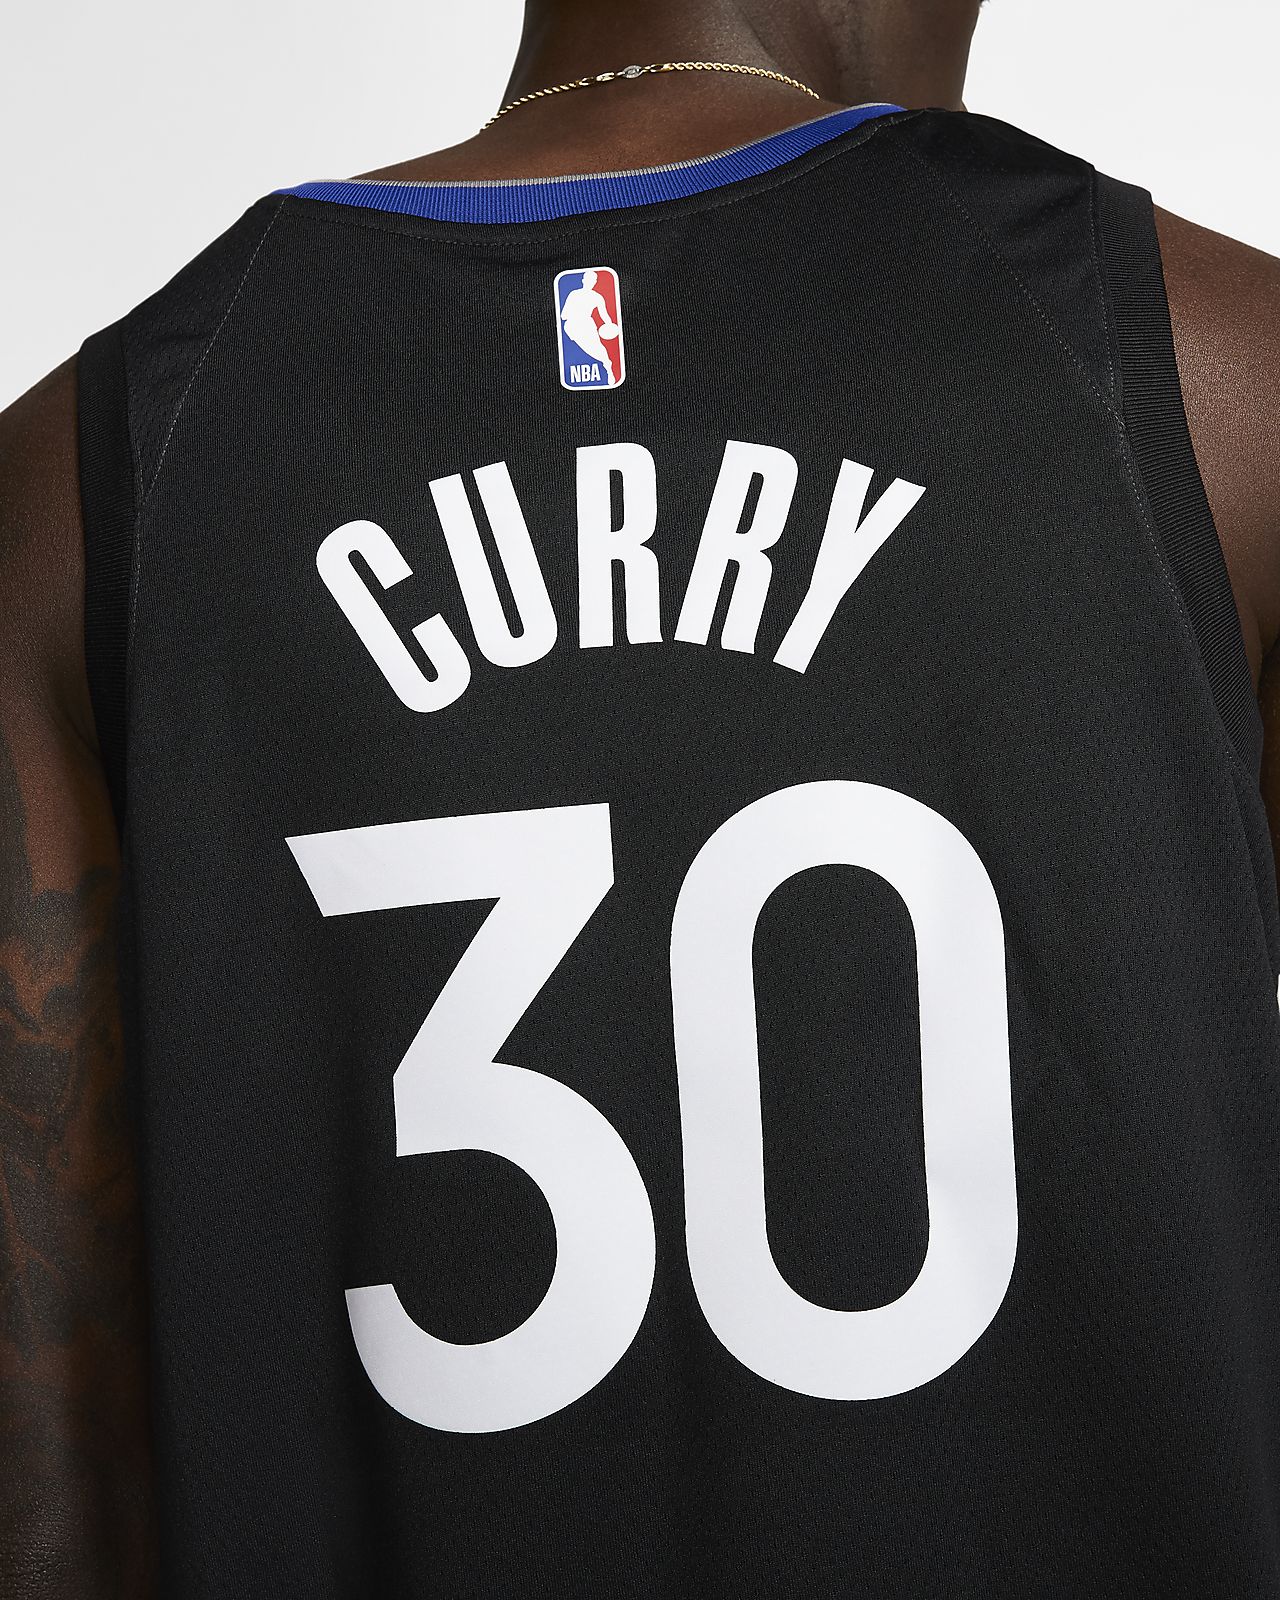 stephen curry city jersey